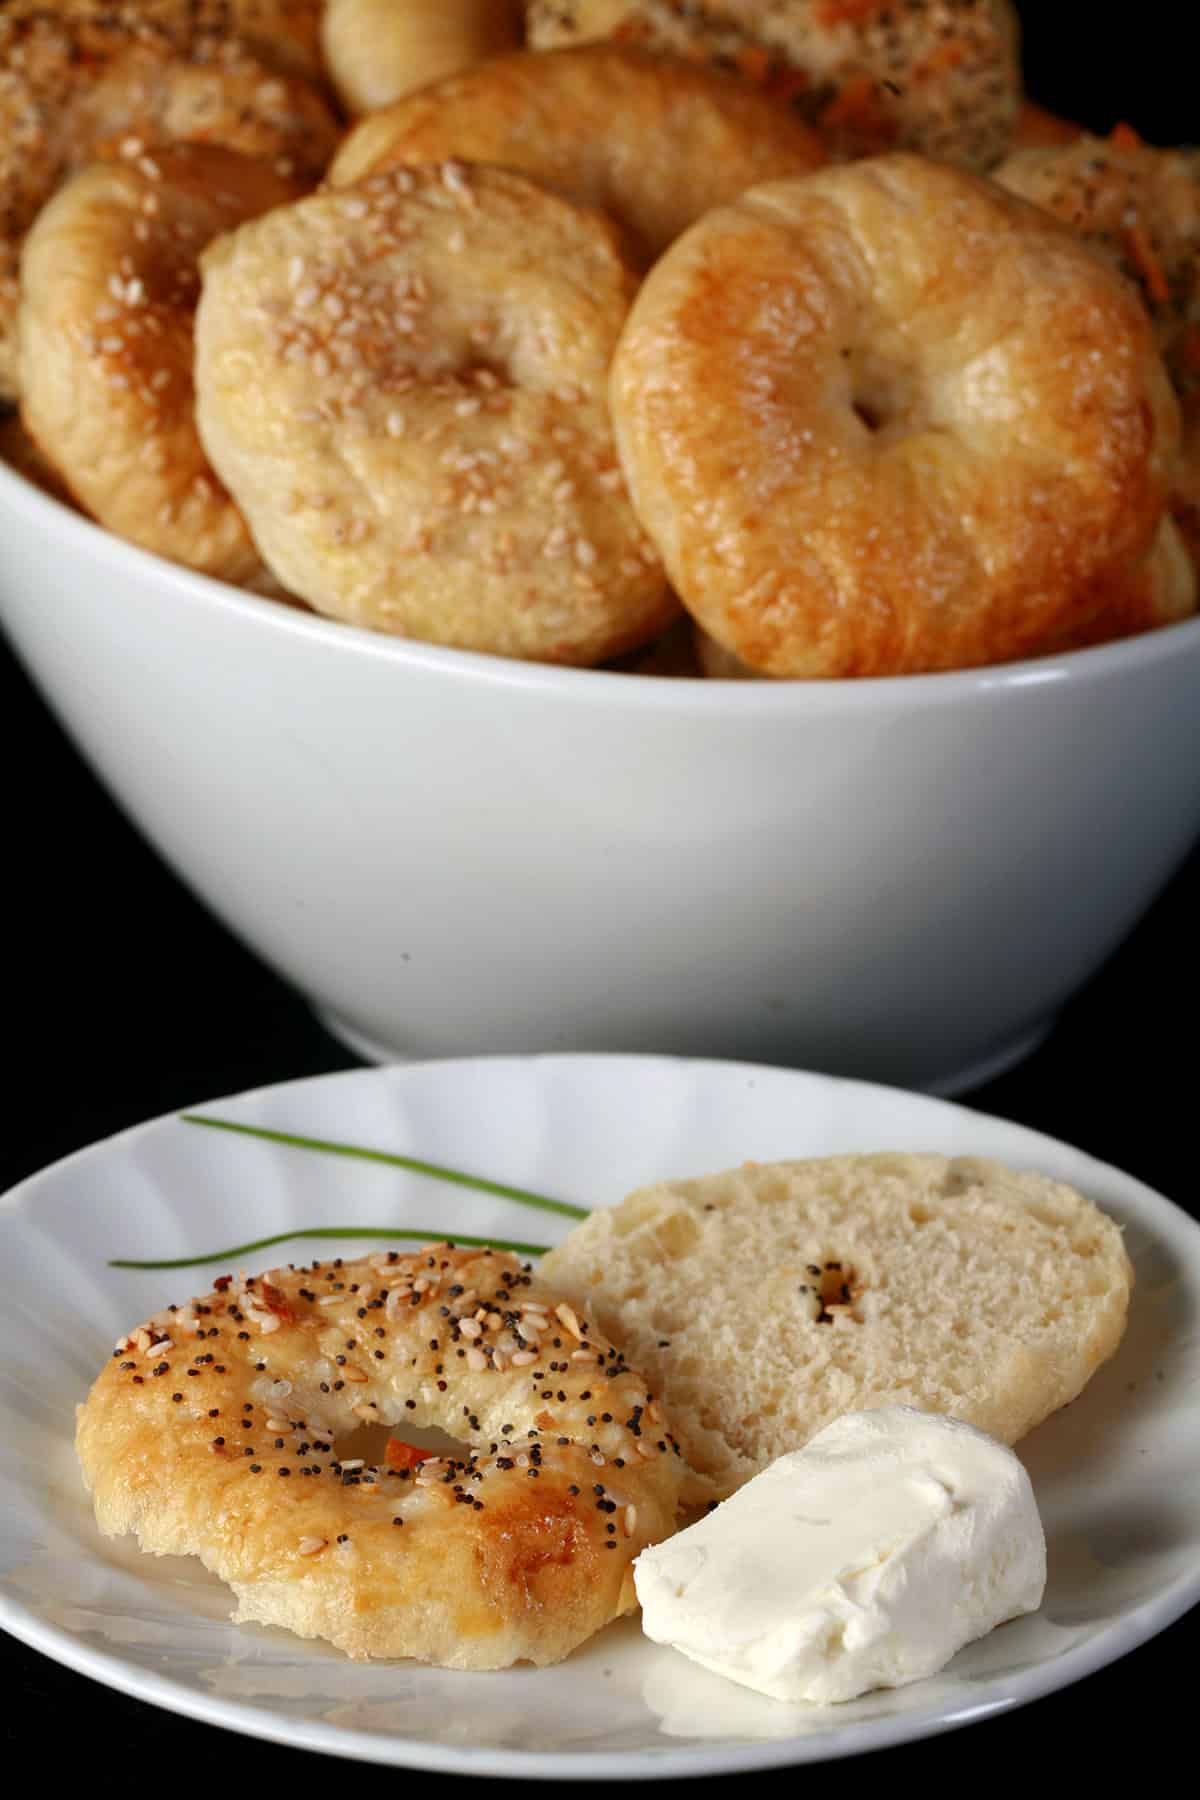 A sliced mini bagel on a plate, with a bowl of mini bagels behind it.